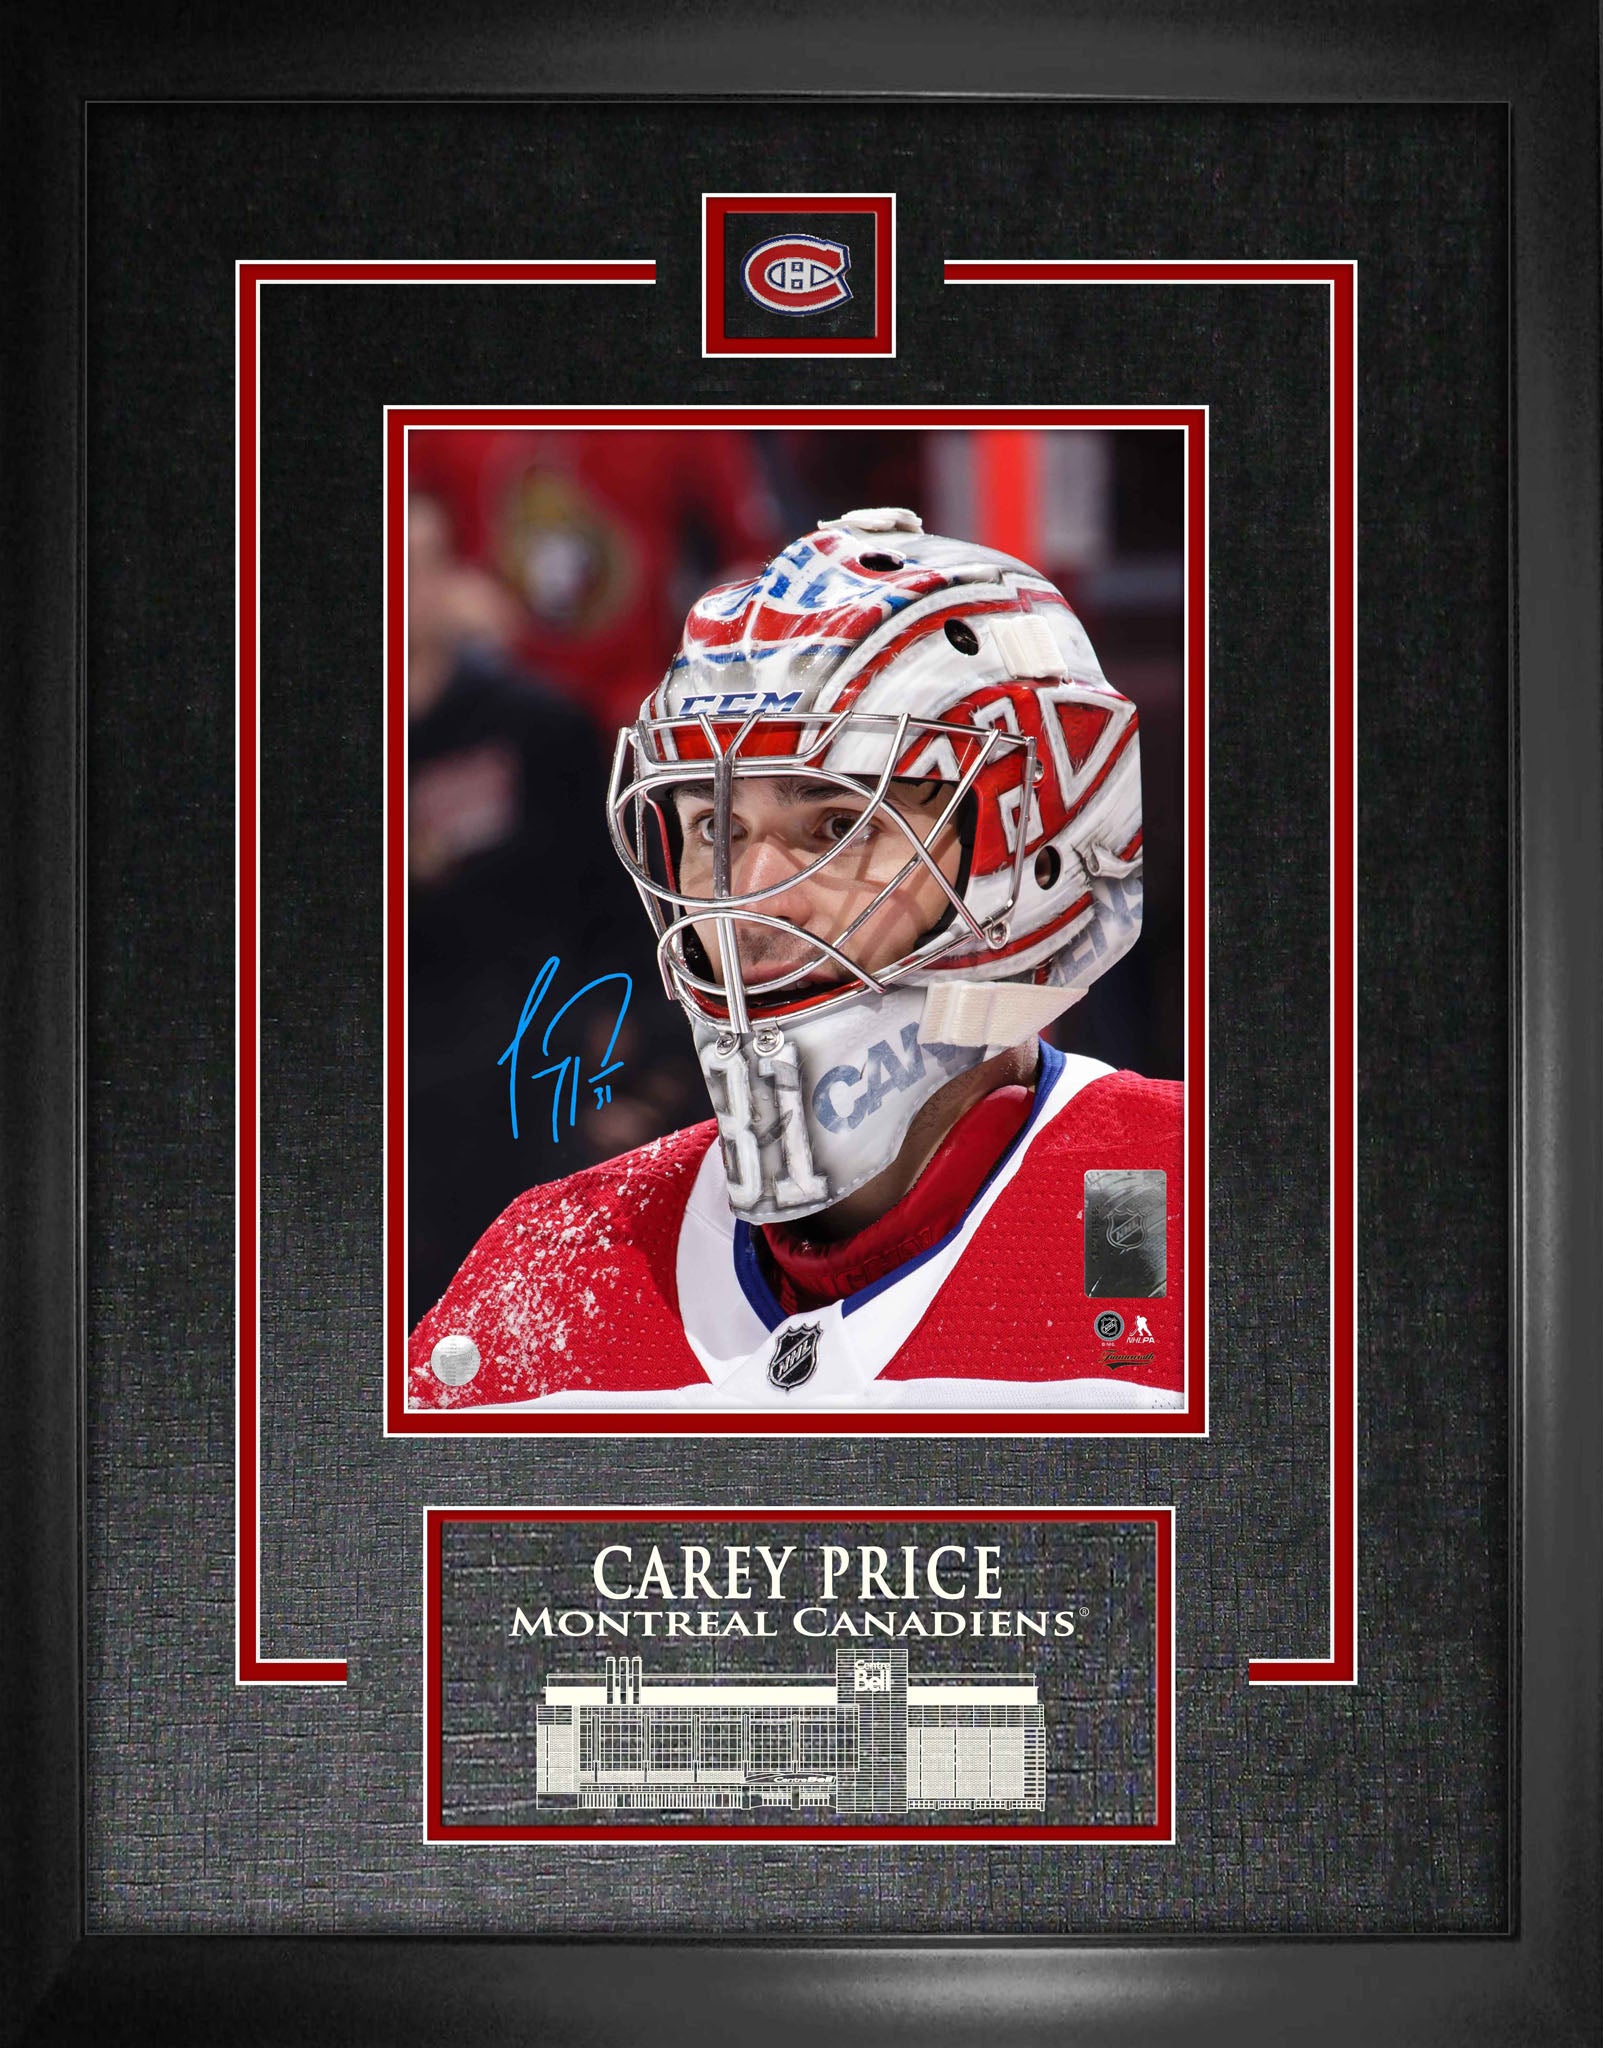 CAREY PRICE #31 Montreal Canadiens unsigned Hockey Frame Cadre